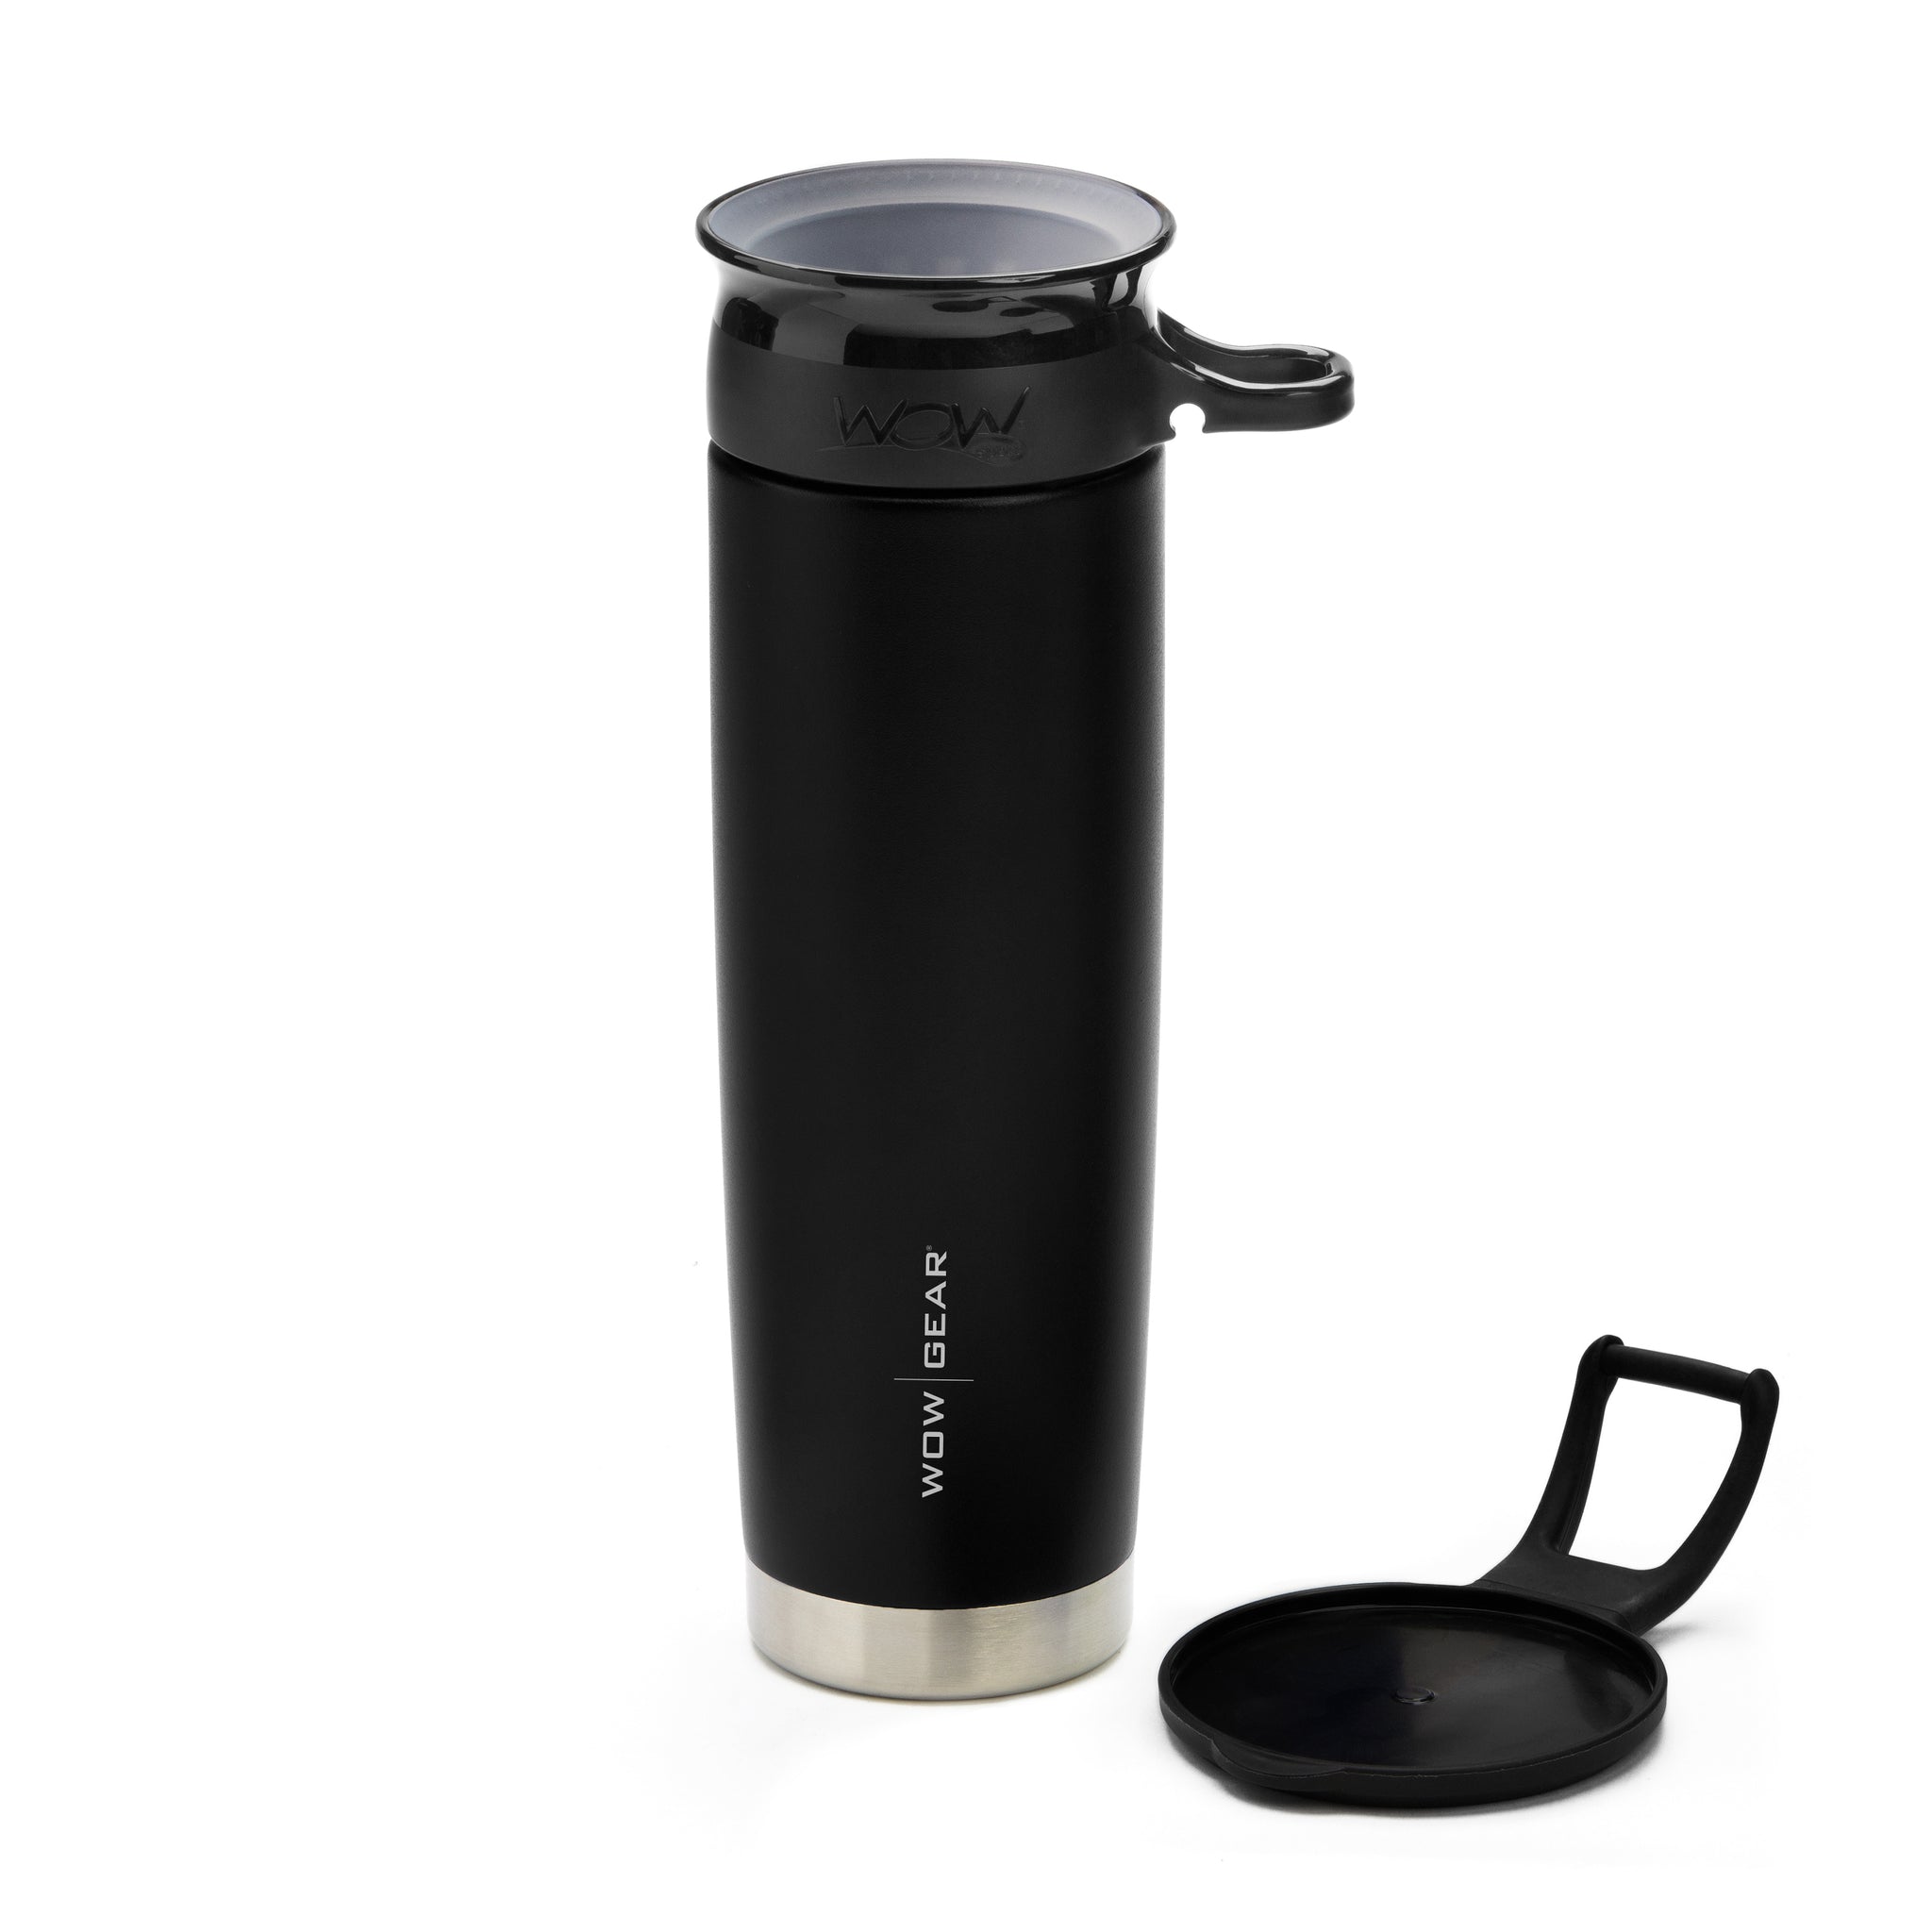 Insulated Squeeze Bottle Black Bottle